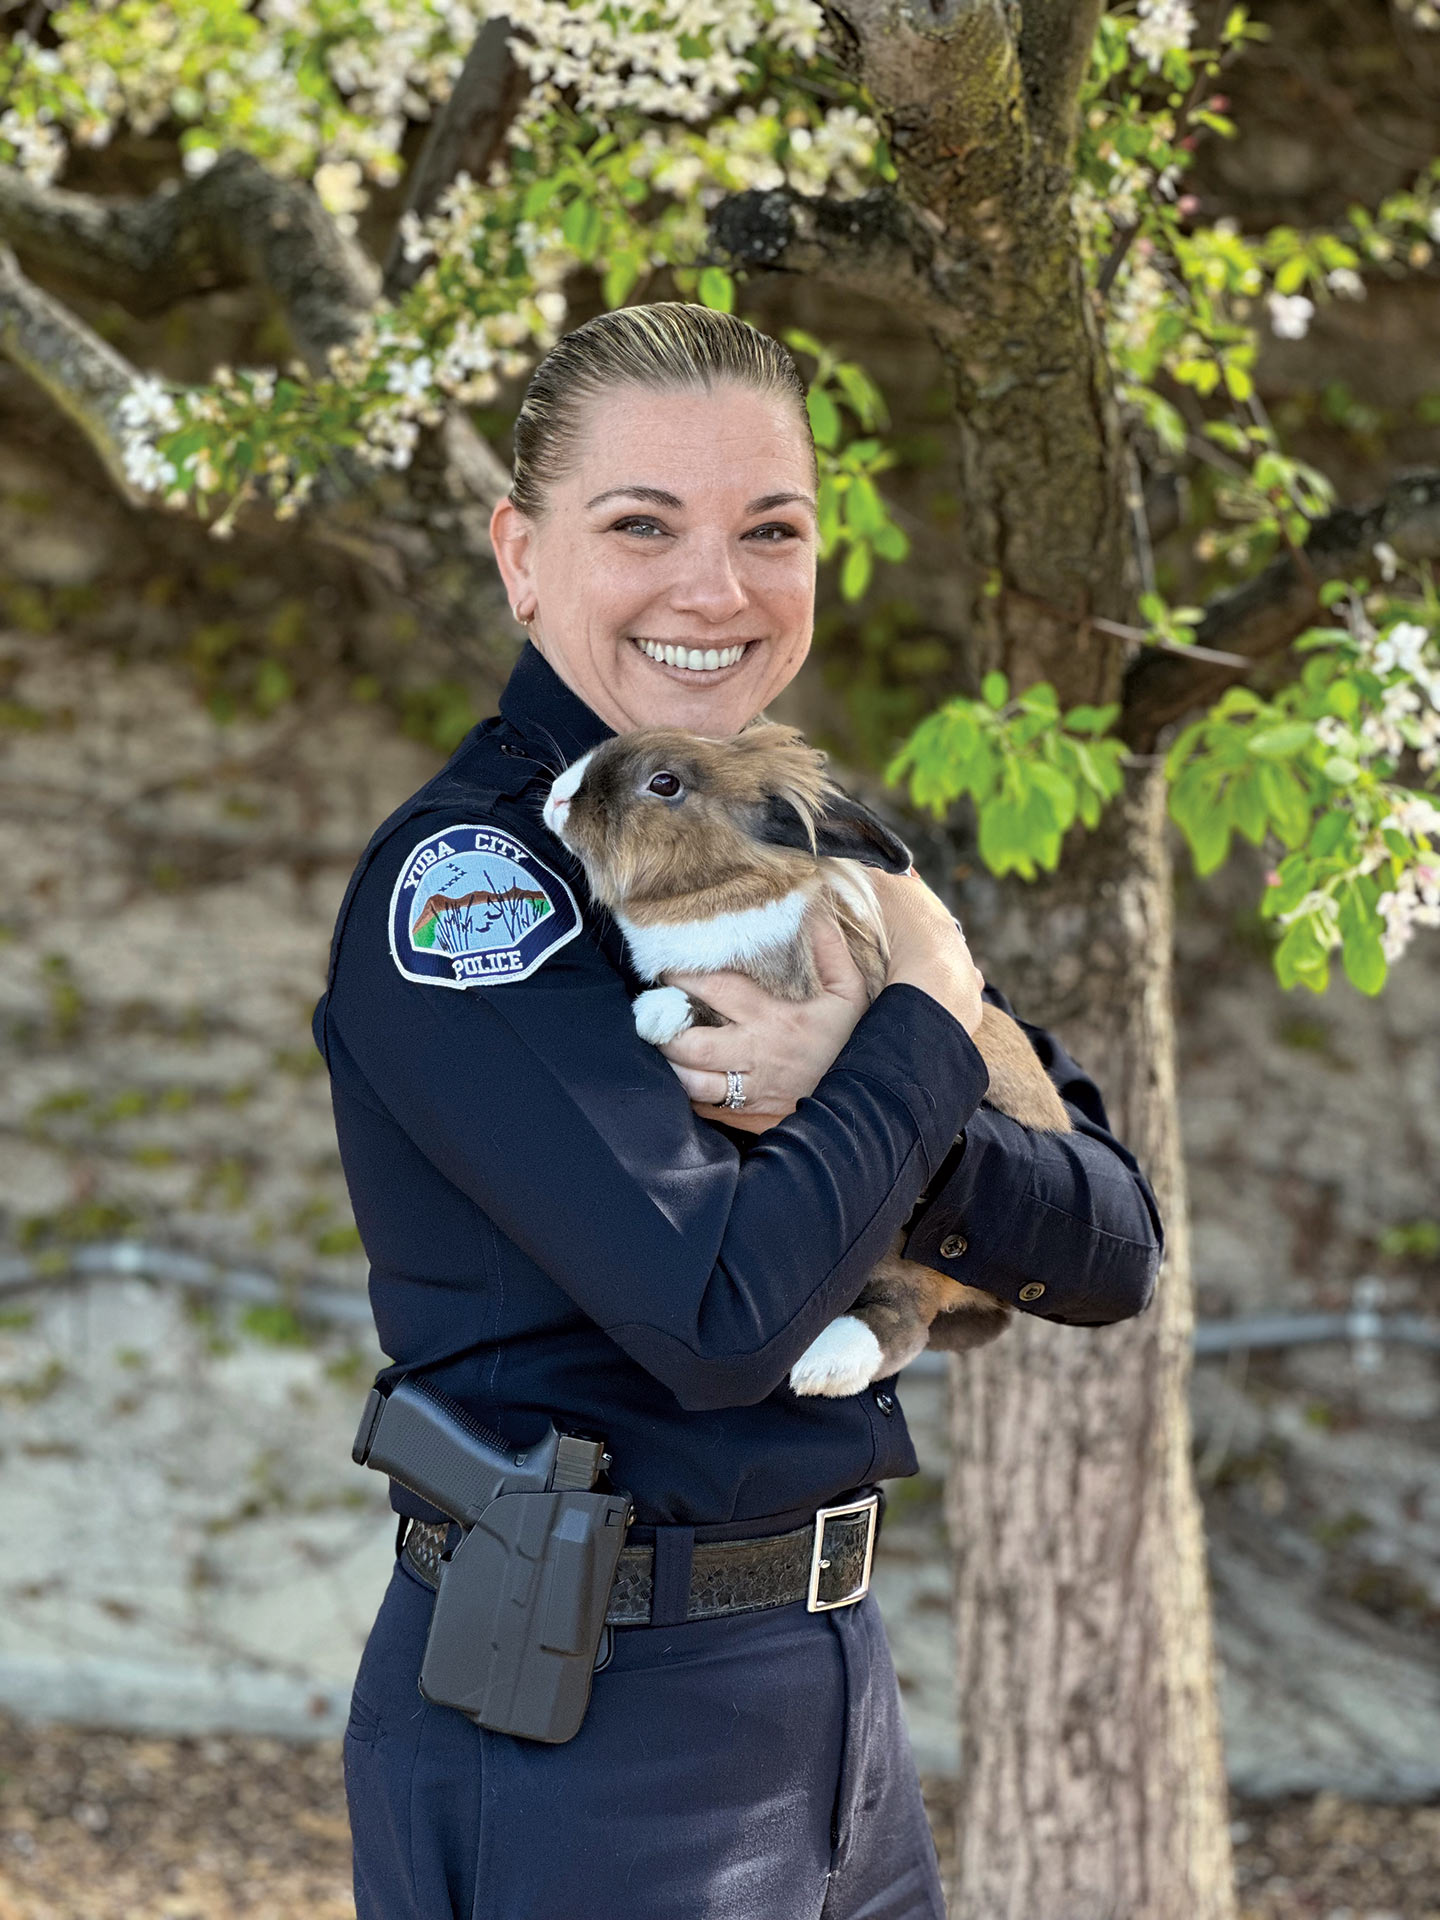 Percy-the-Support-Rabbit-with-Lieutenant-Michelle-Brazil-yuba-city-police-department-ycpd-fix